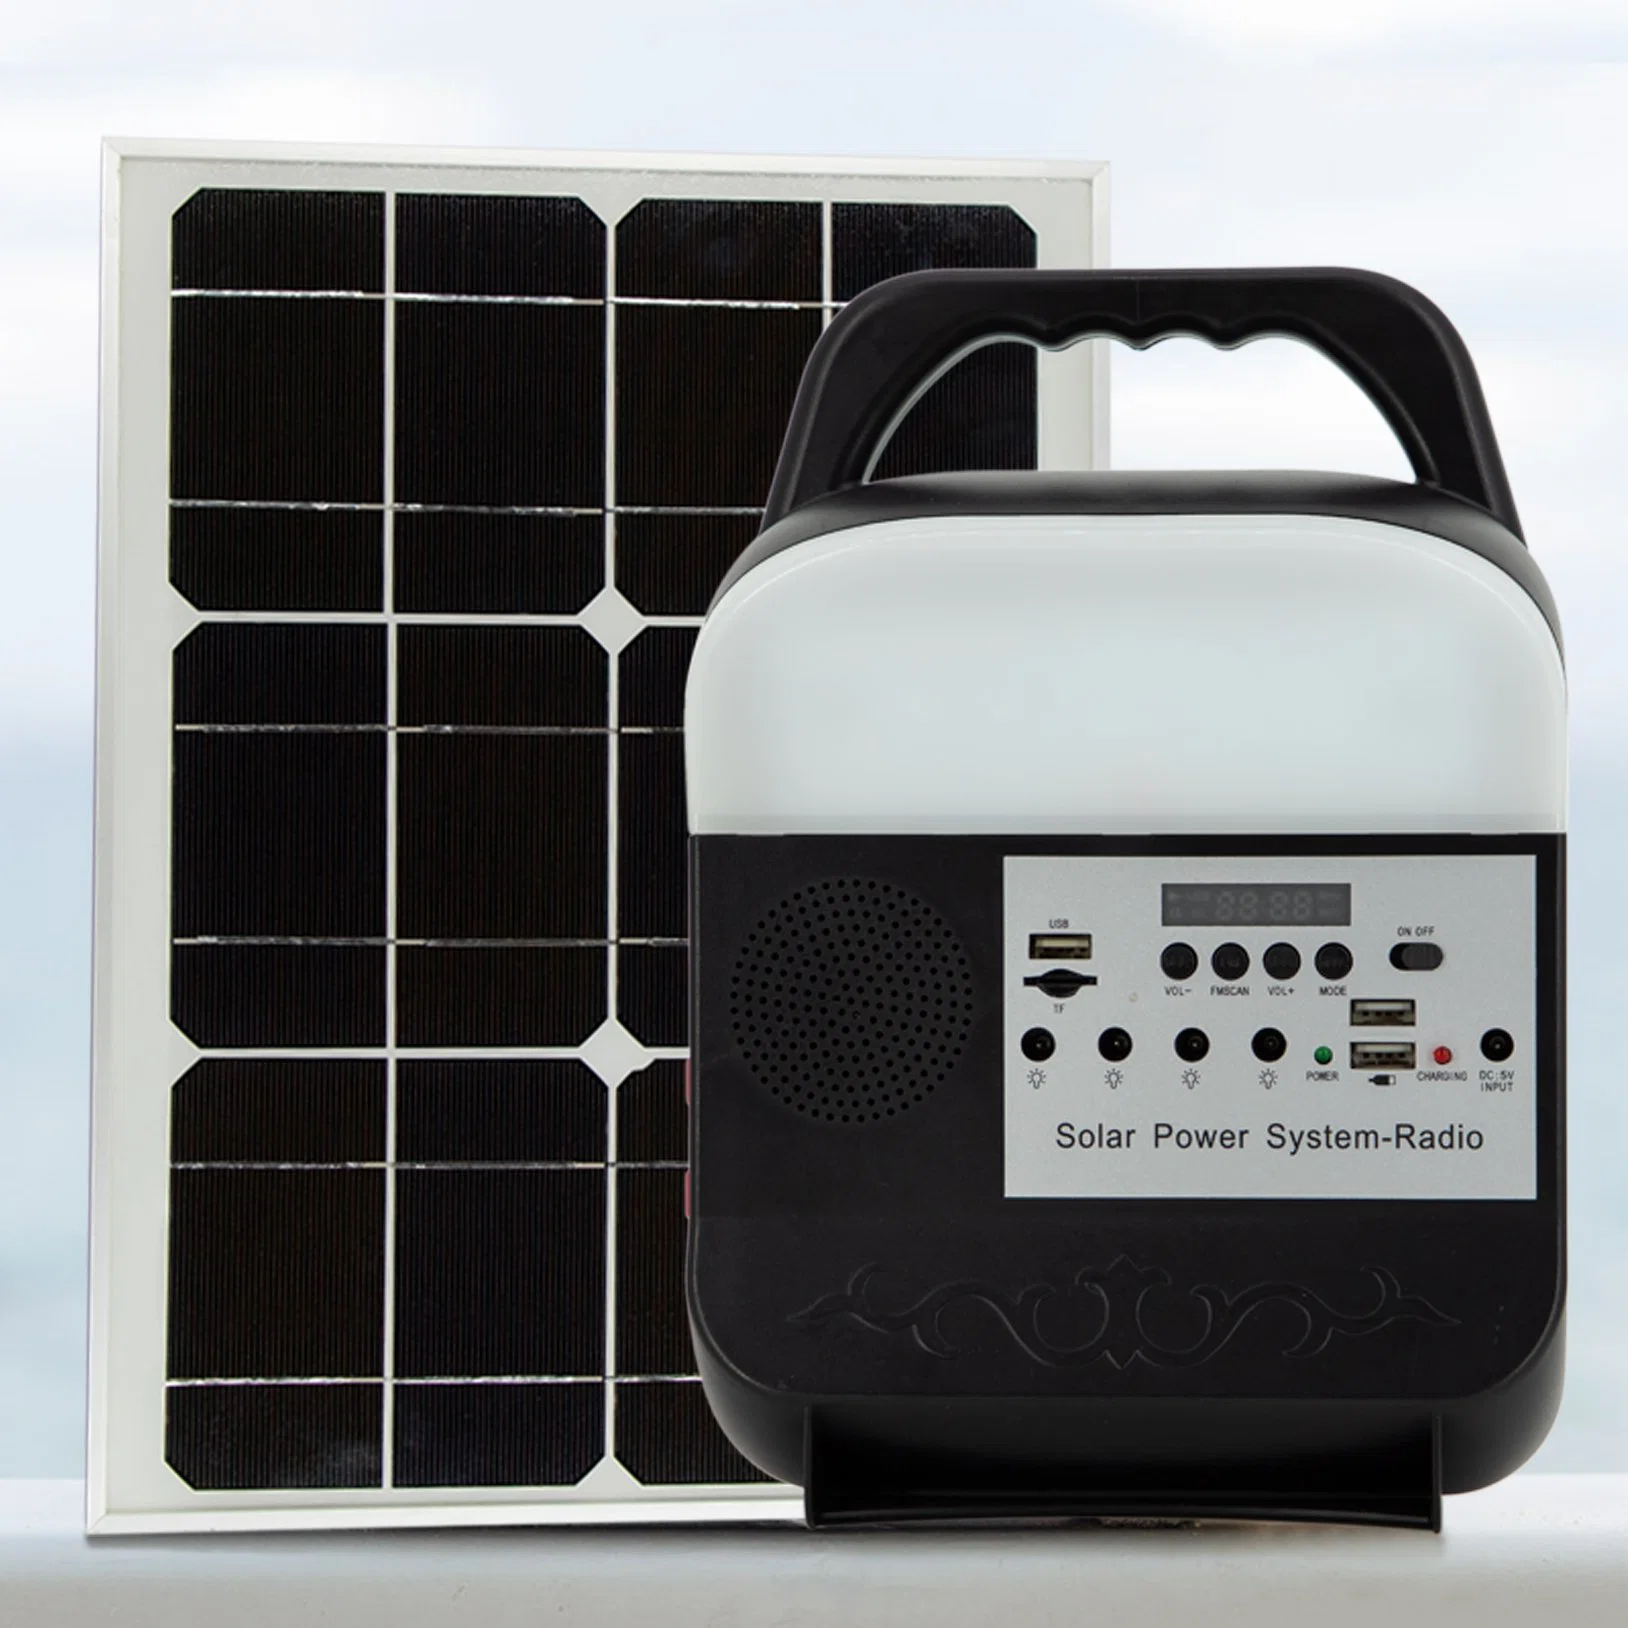 Portable 6V Rechargeable Solar Panel Power Storage Generator System USB Charger with Lamp Lighting Home Solar Energy System Kit